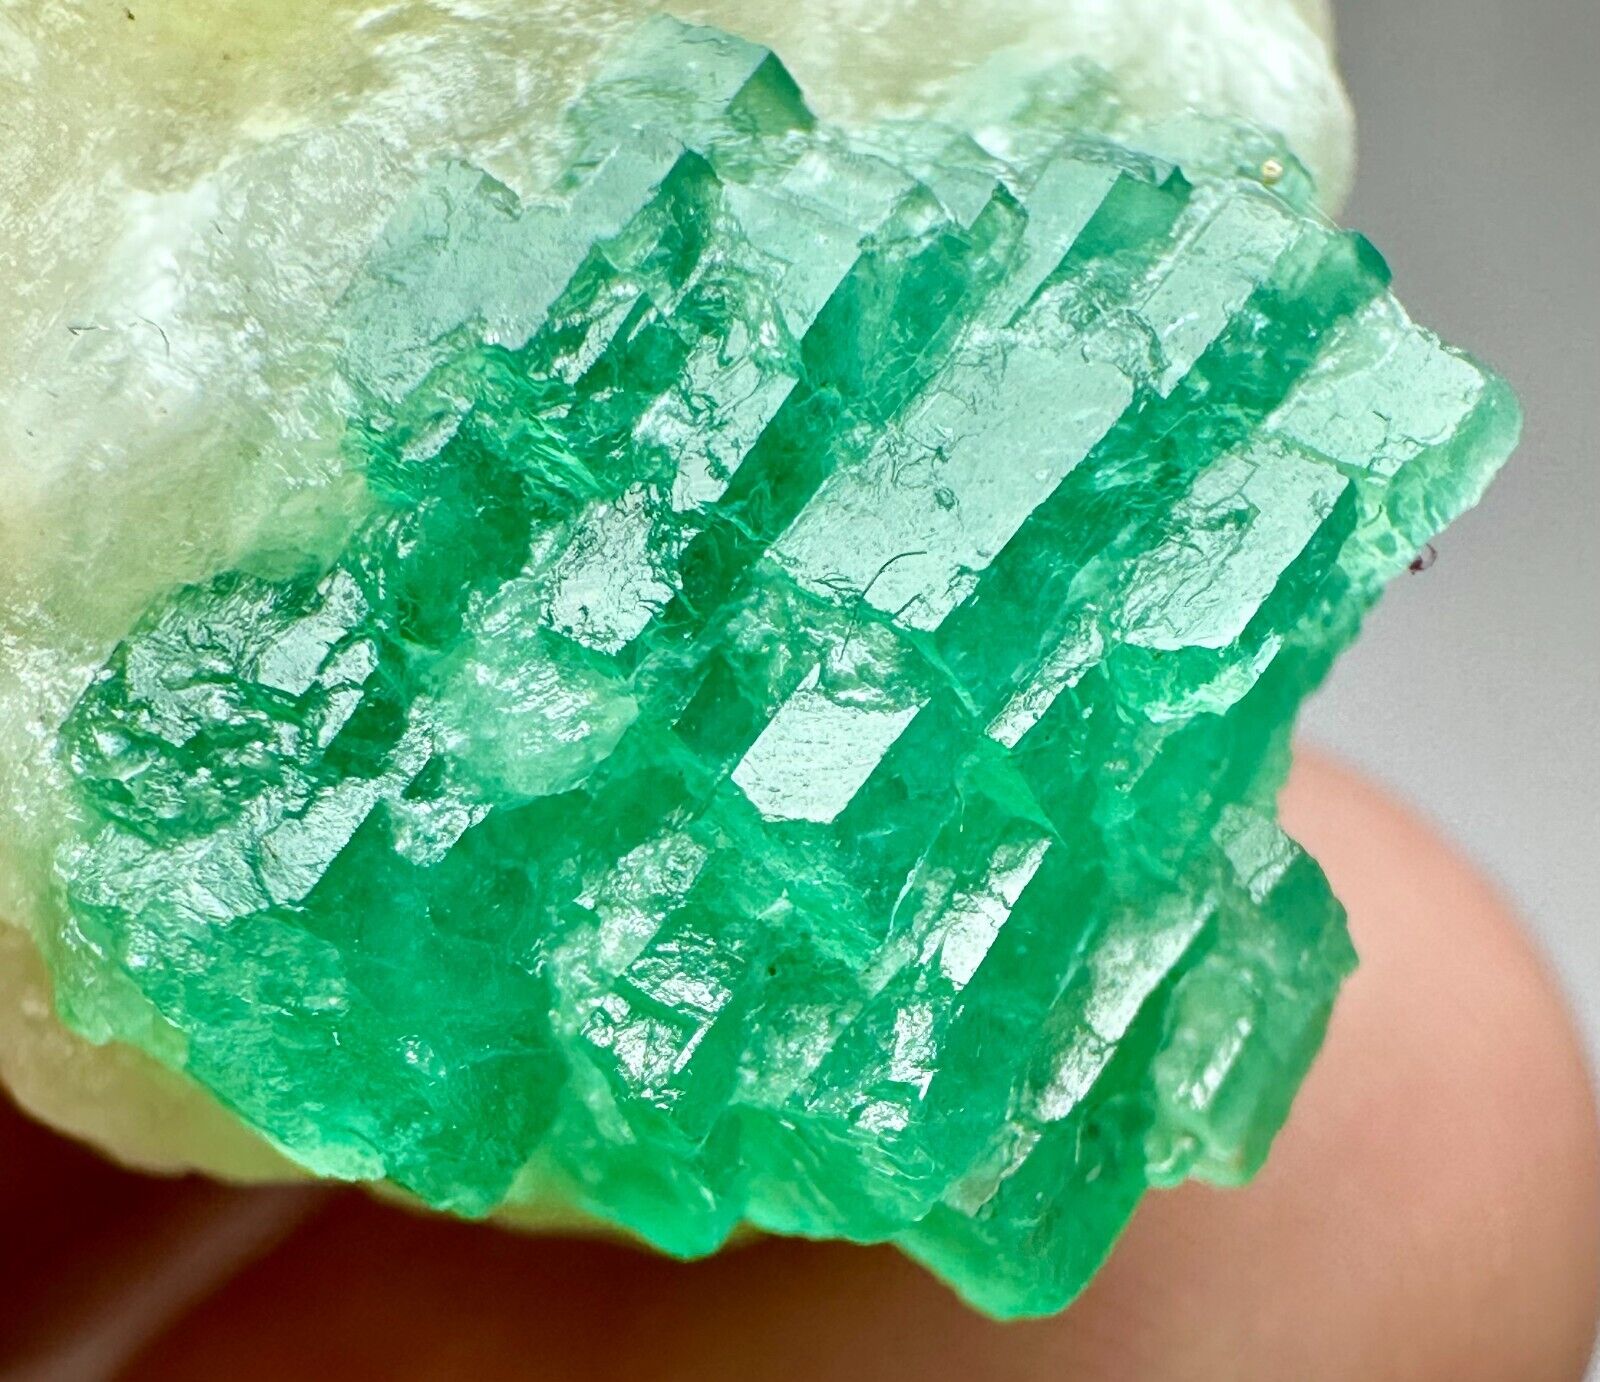 48 Ct Wow  Top Green Swat Emerald Crystals Cluster Bunch On Matrix From @PAK